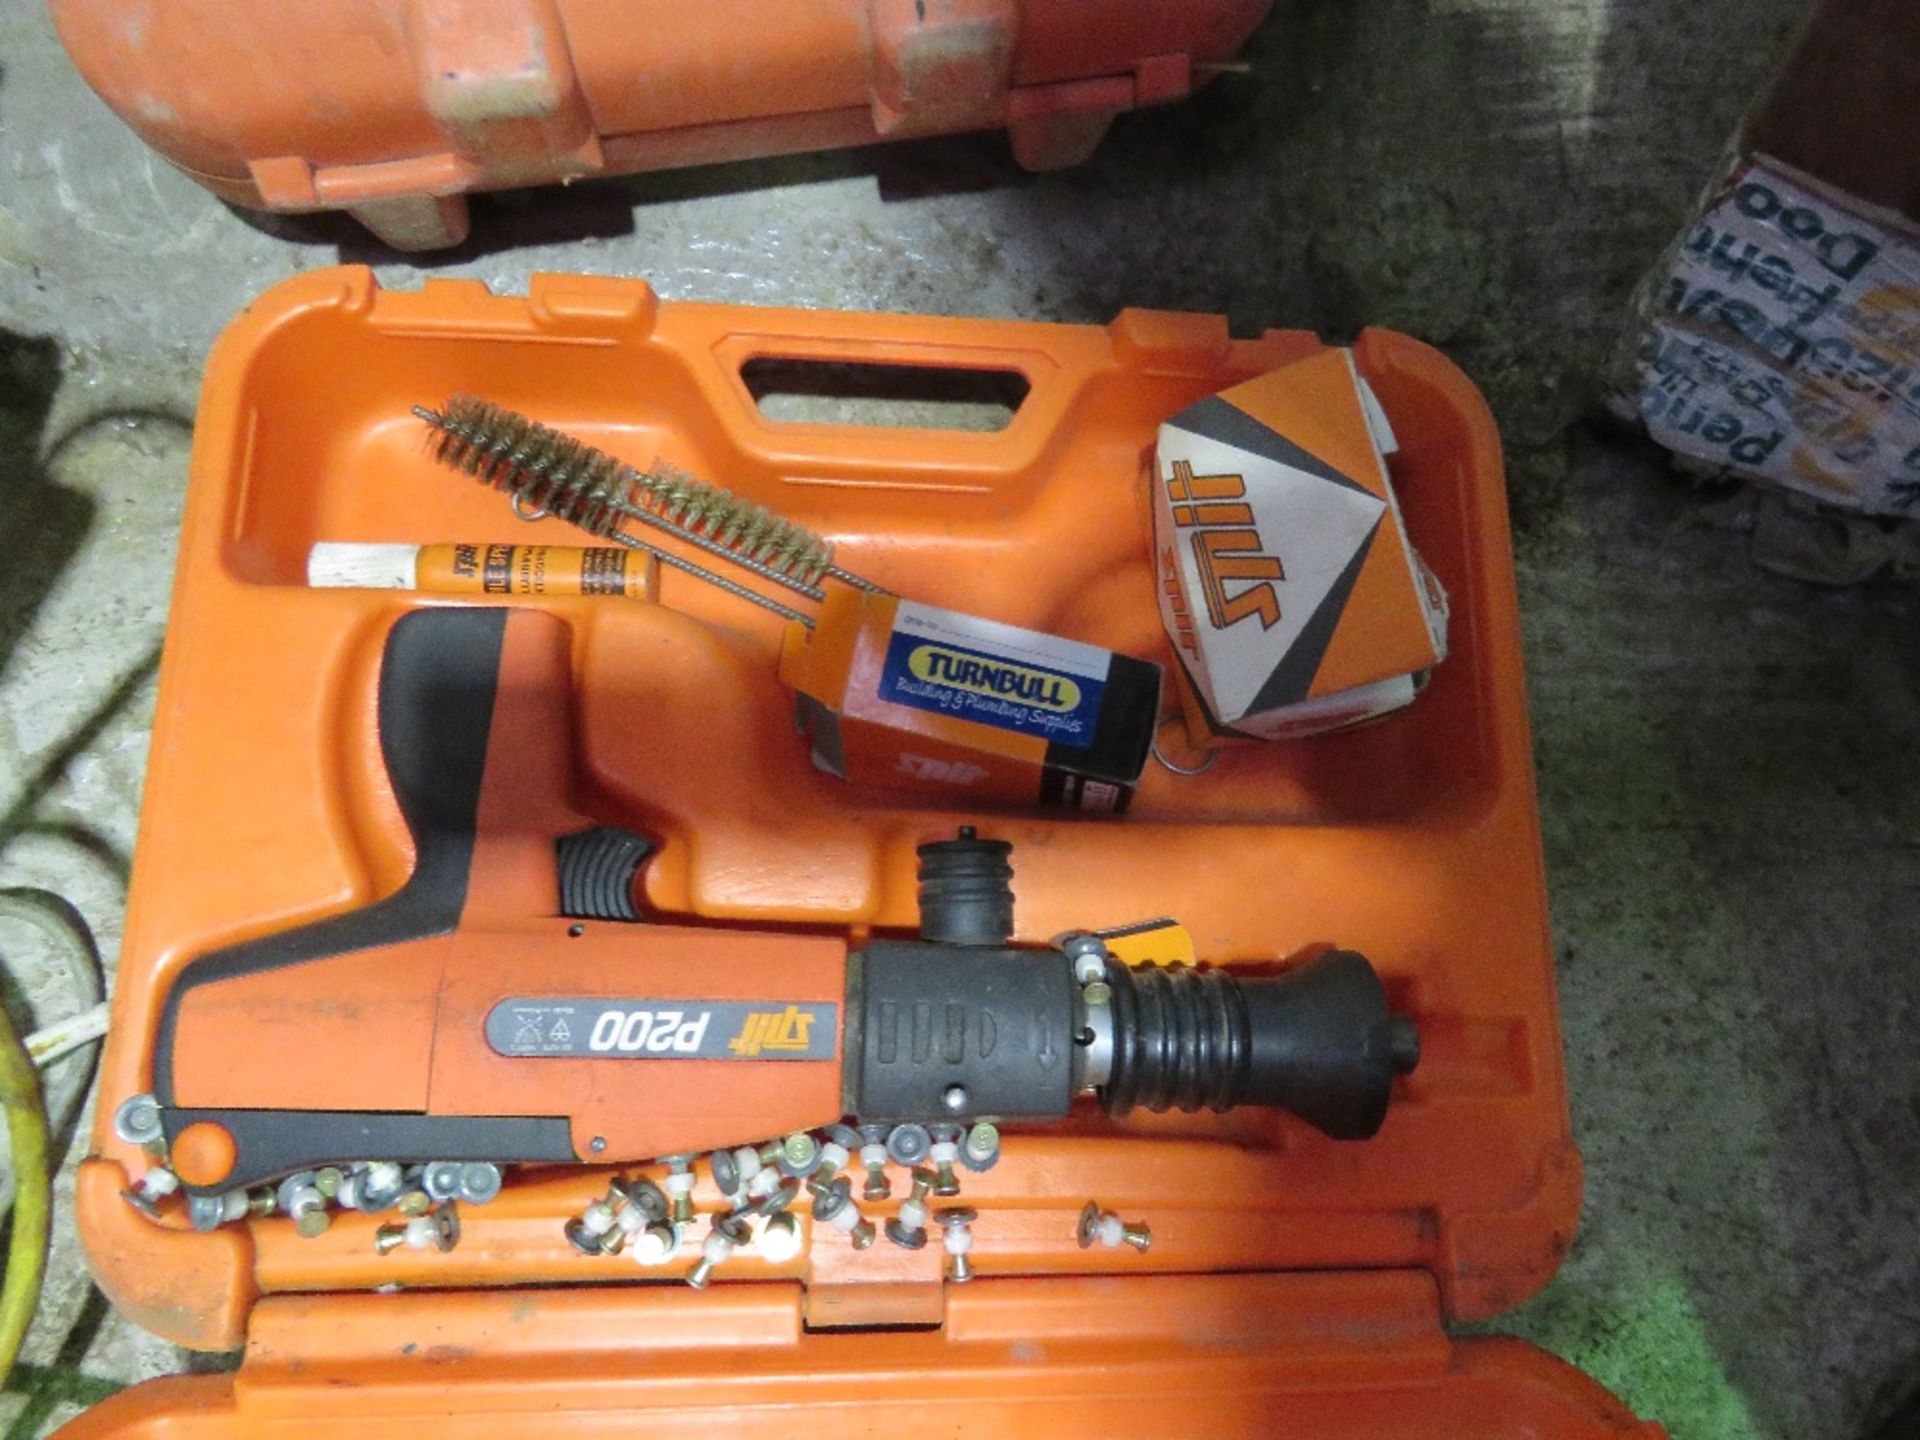 SPIT 200 NAIL GUN IN A CASE DIRECT FROM LOCAL COMPANY DUE TO DEPOT CLOSURE.